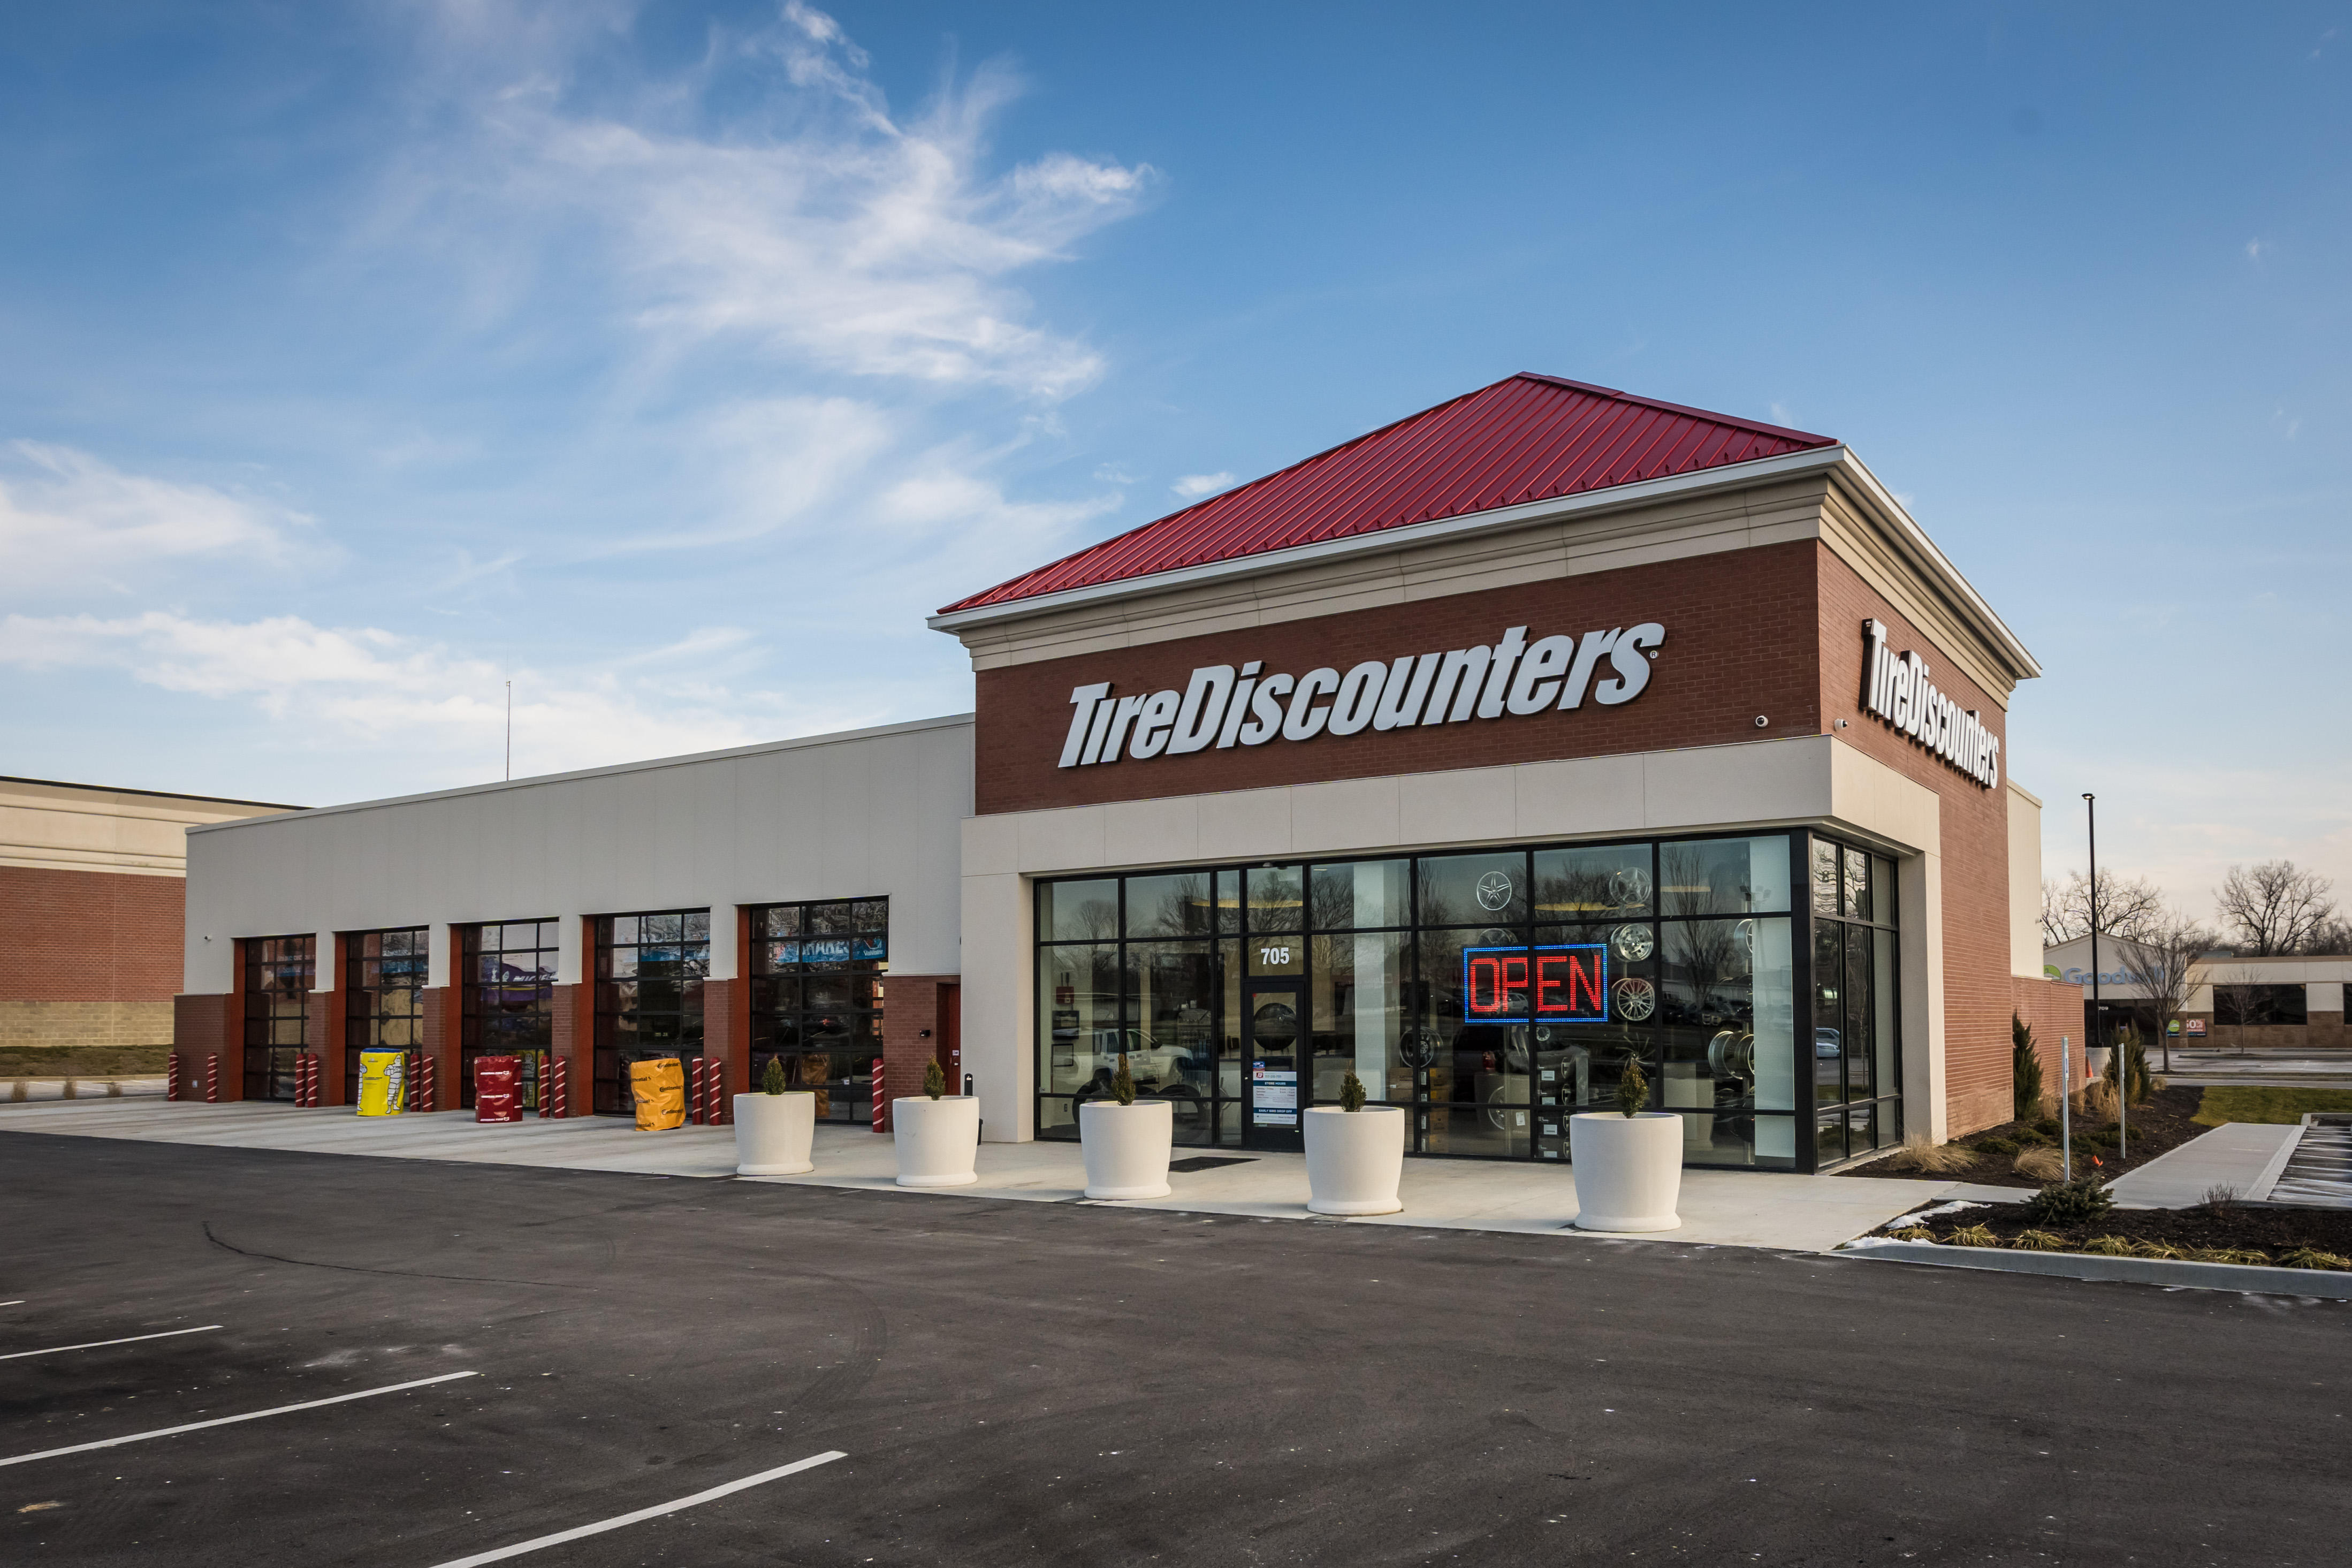 Tire Discounters on 705 N. US-31 in Greenwood